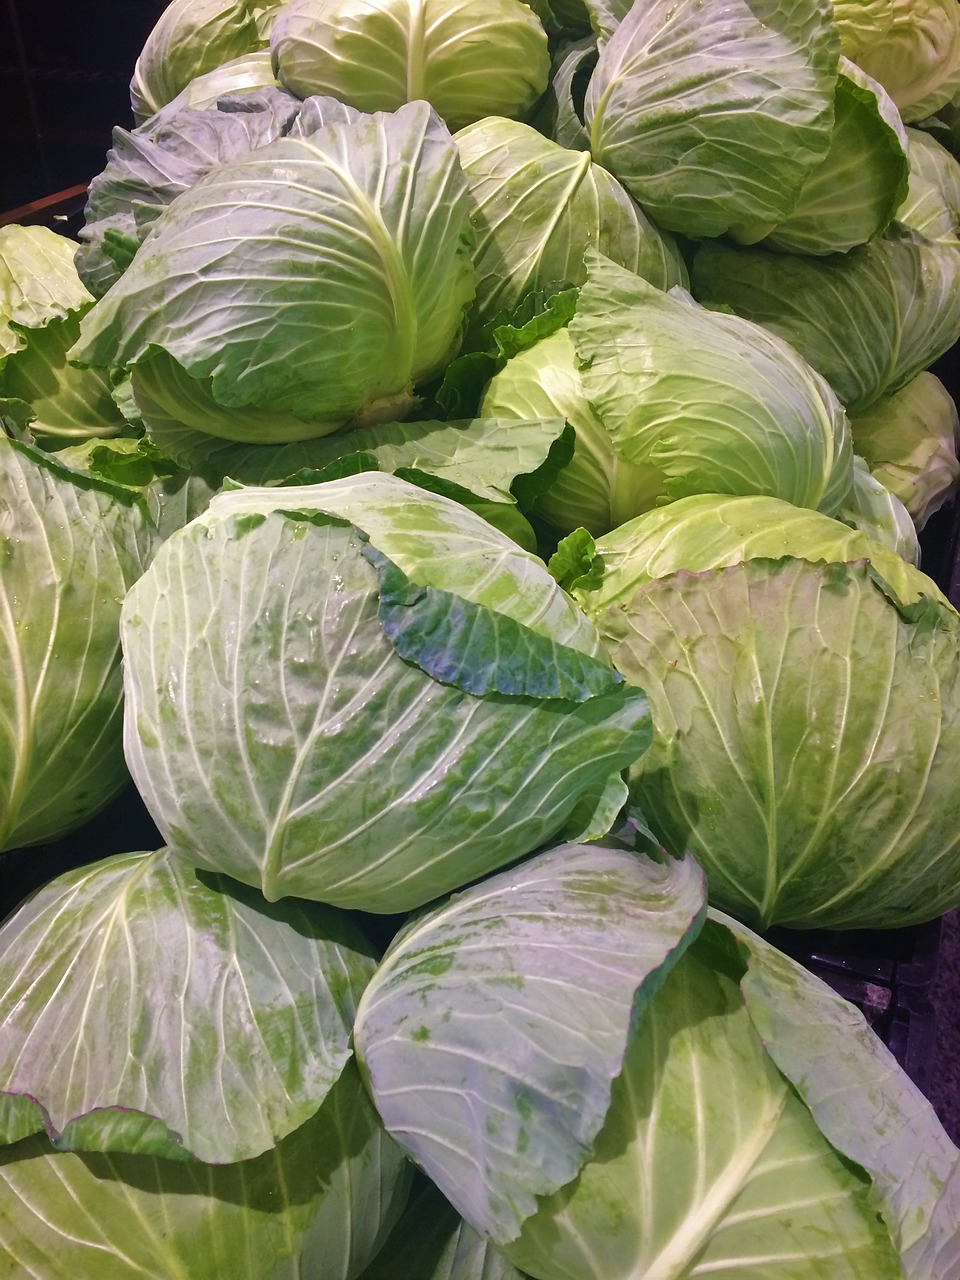 Cabbage-Green-White-Pile-Up-Leafy-Vegetables-1887051.jpg